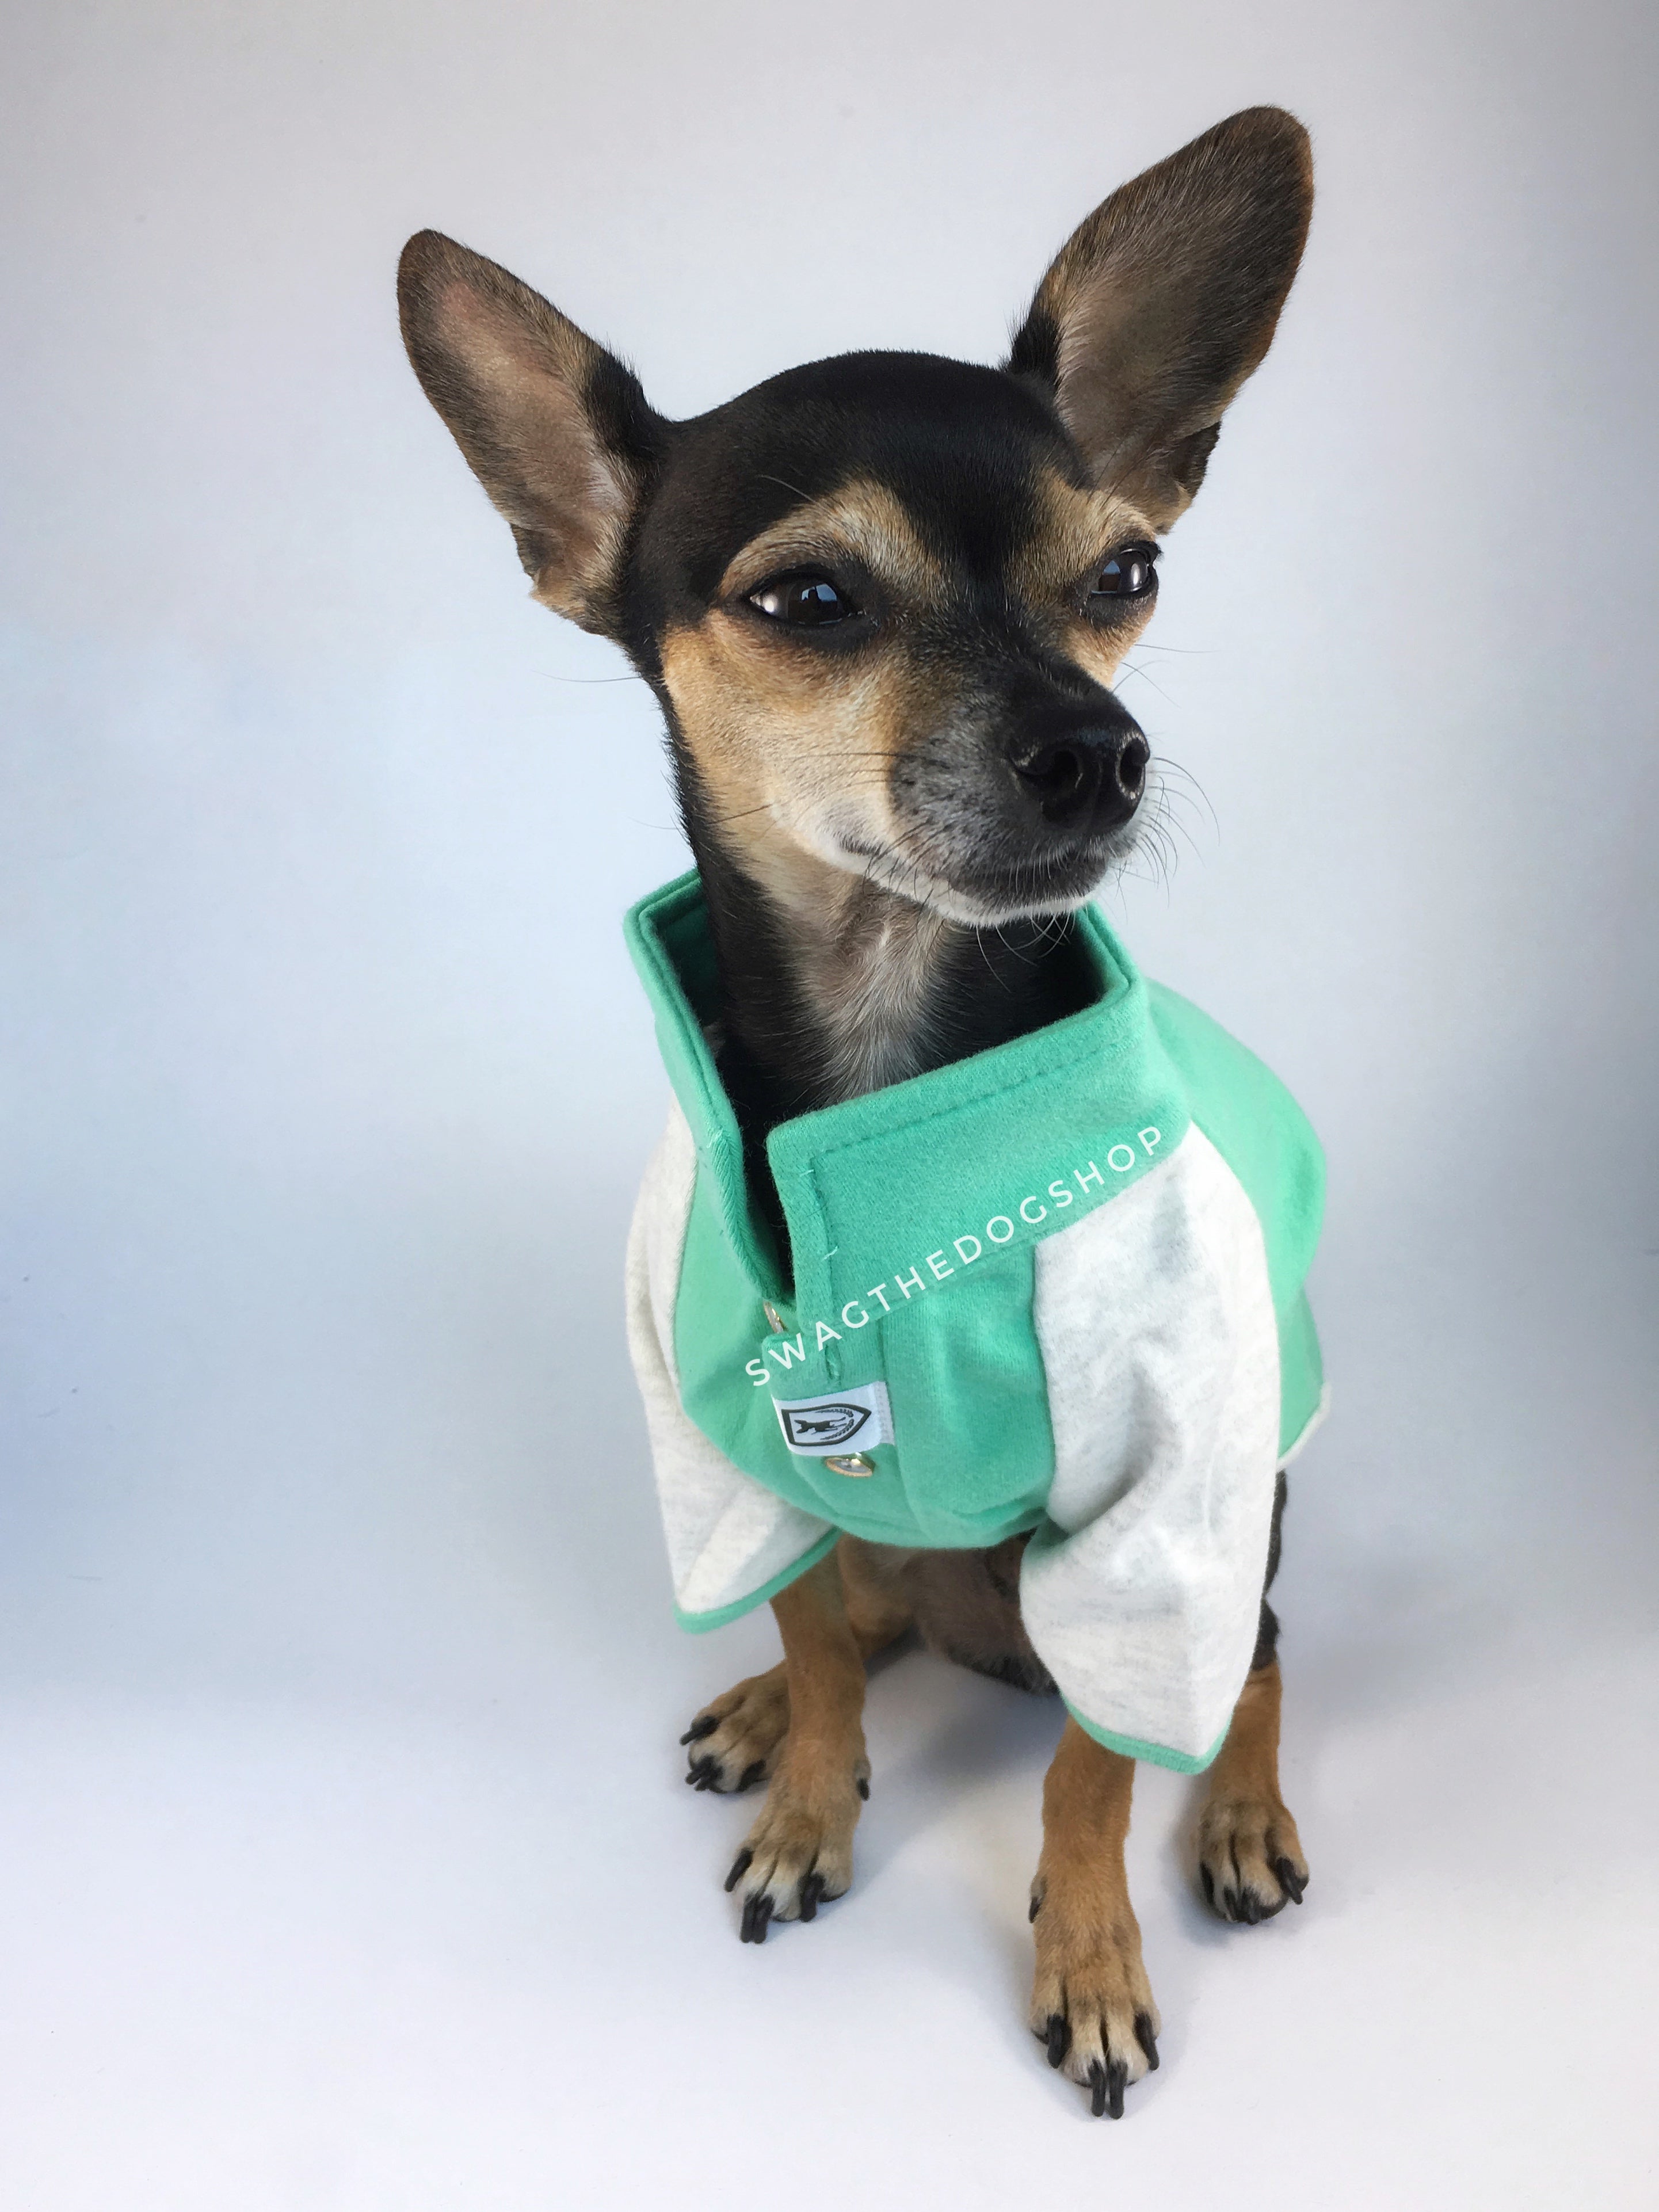 Surfside Emerald Green Polo Shirt - Full Front View of Cute Chihuahua Dog Wearing Shirt. Emerald Green with Light Gray Sleeves Polo Shirt